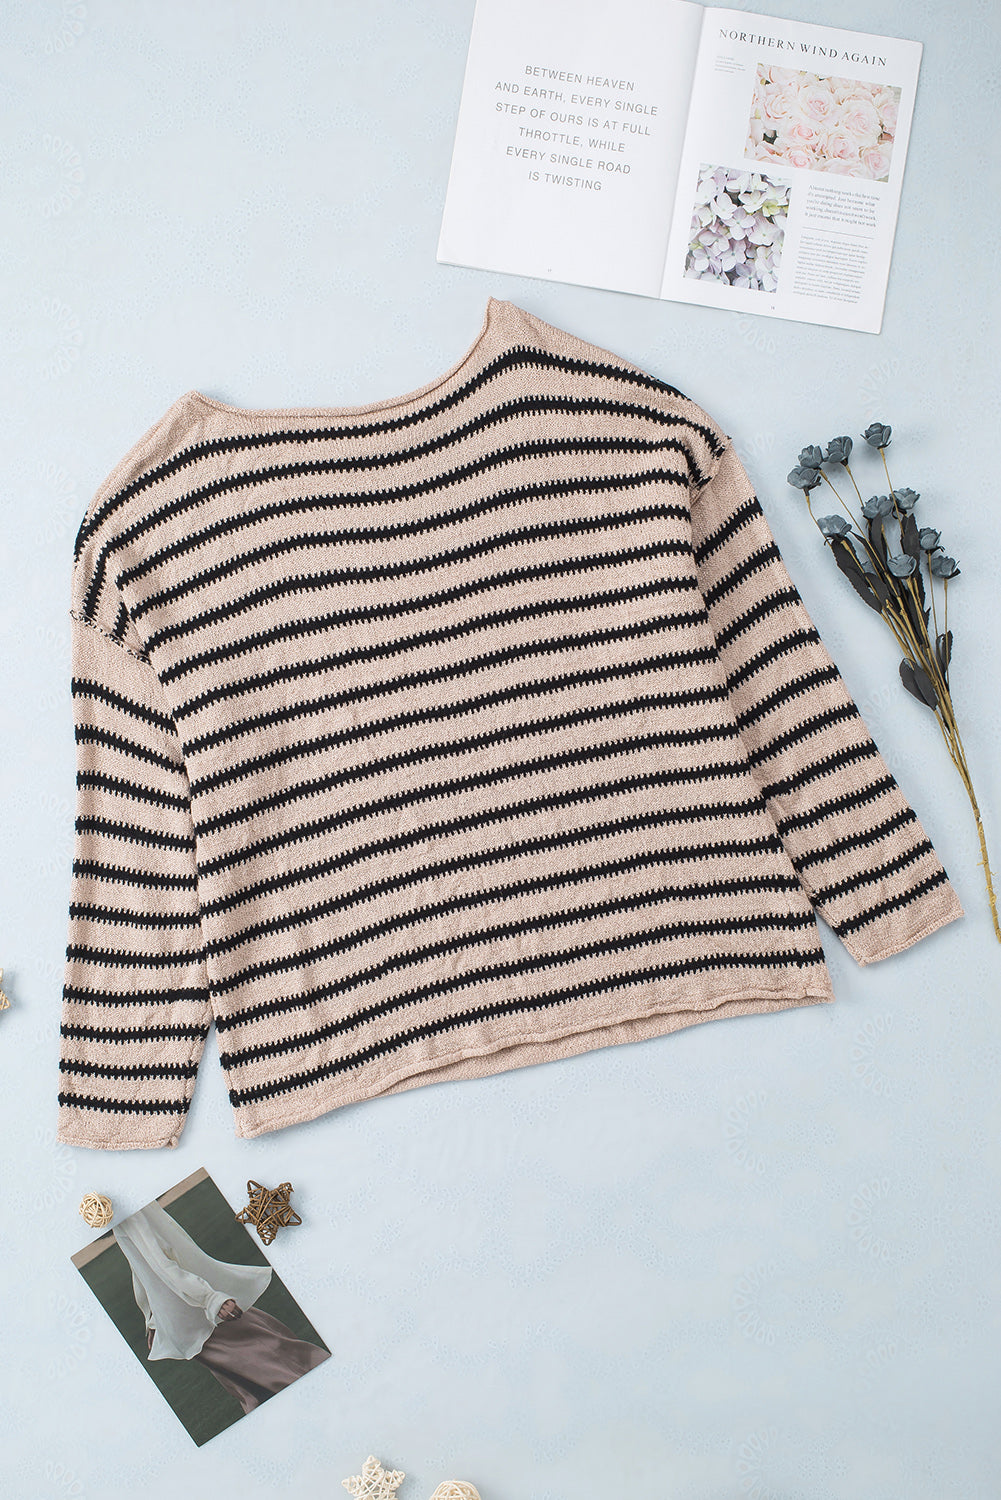 Casual Drop Shoulder Knitted Pullover Striped Sweater